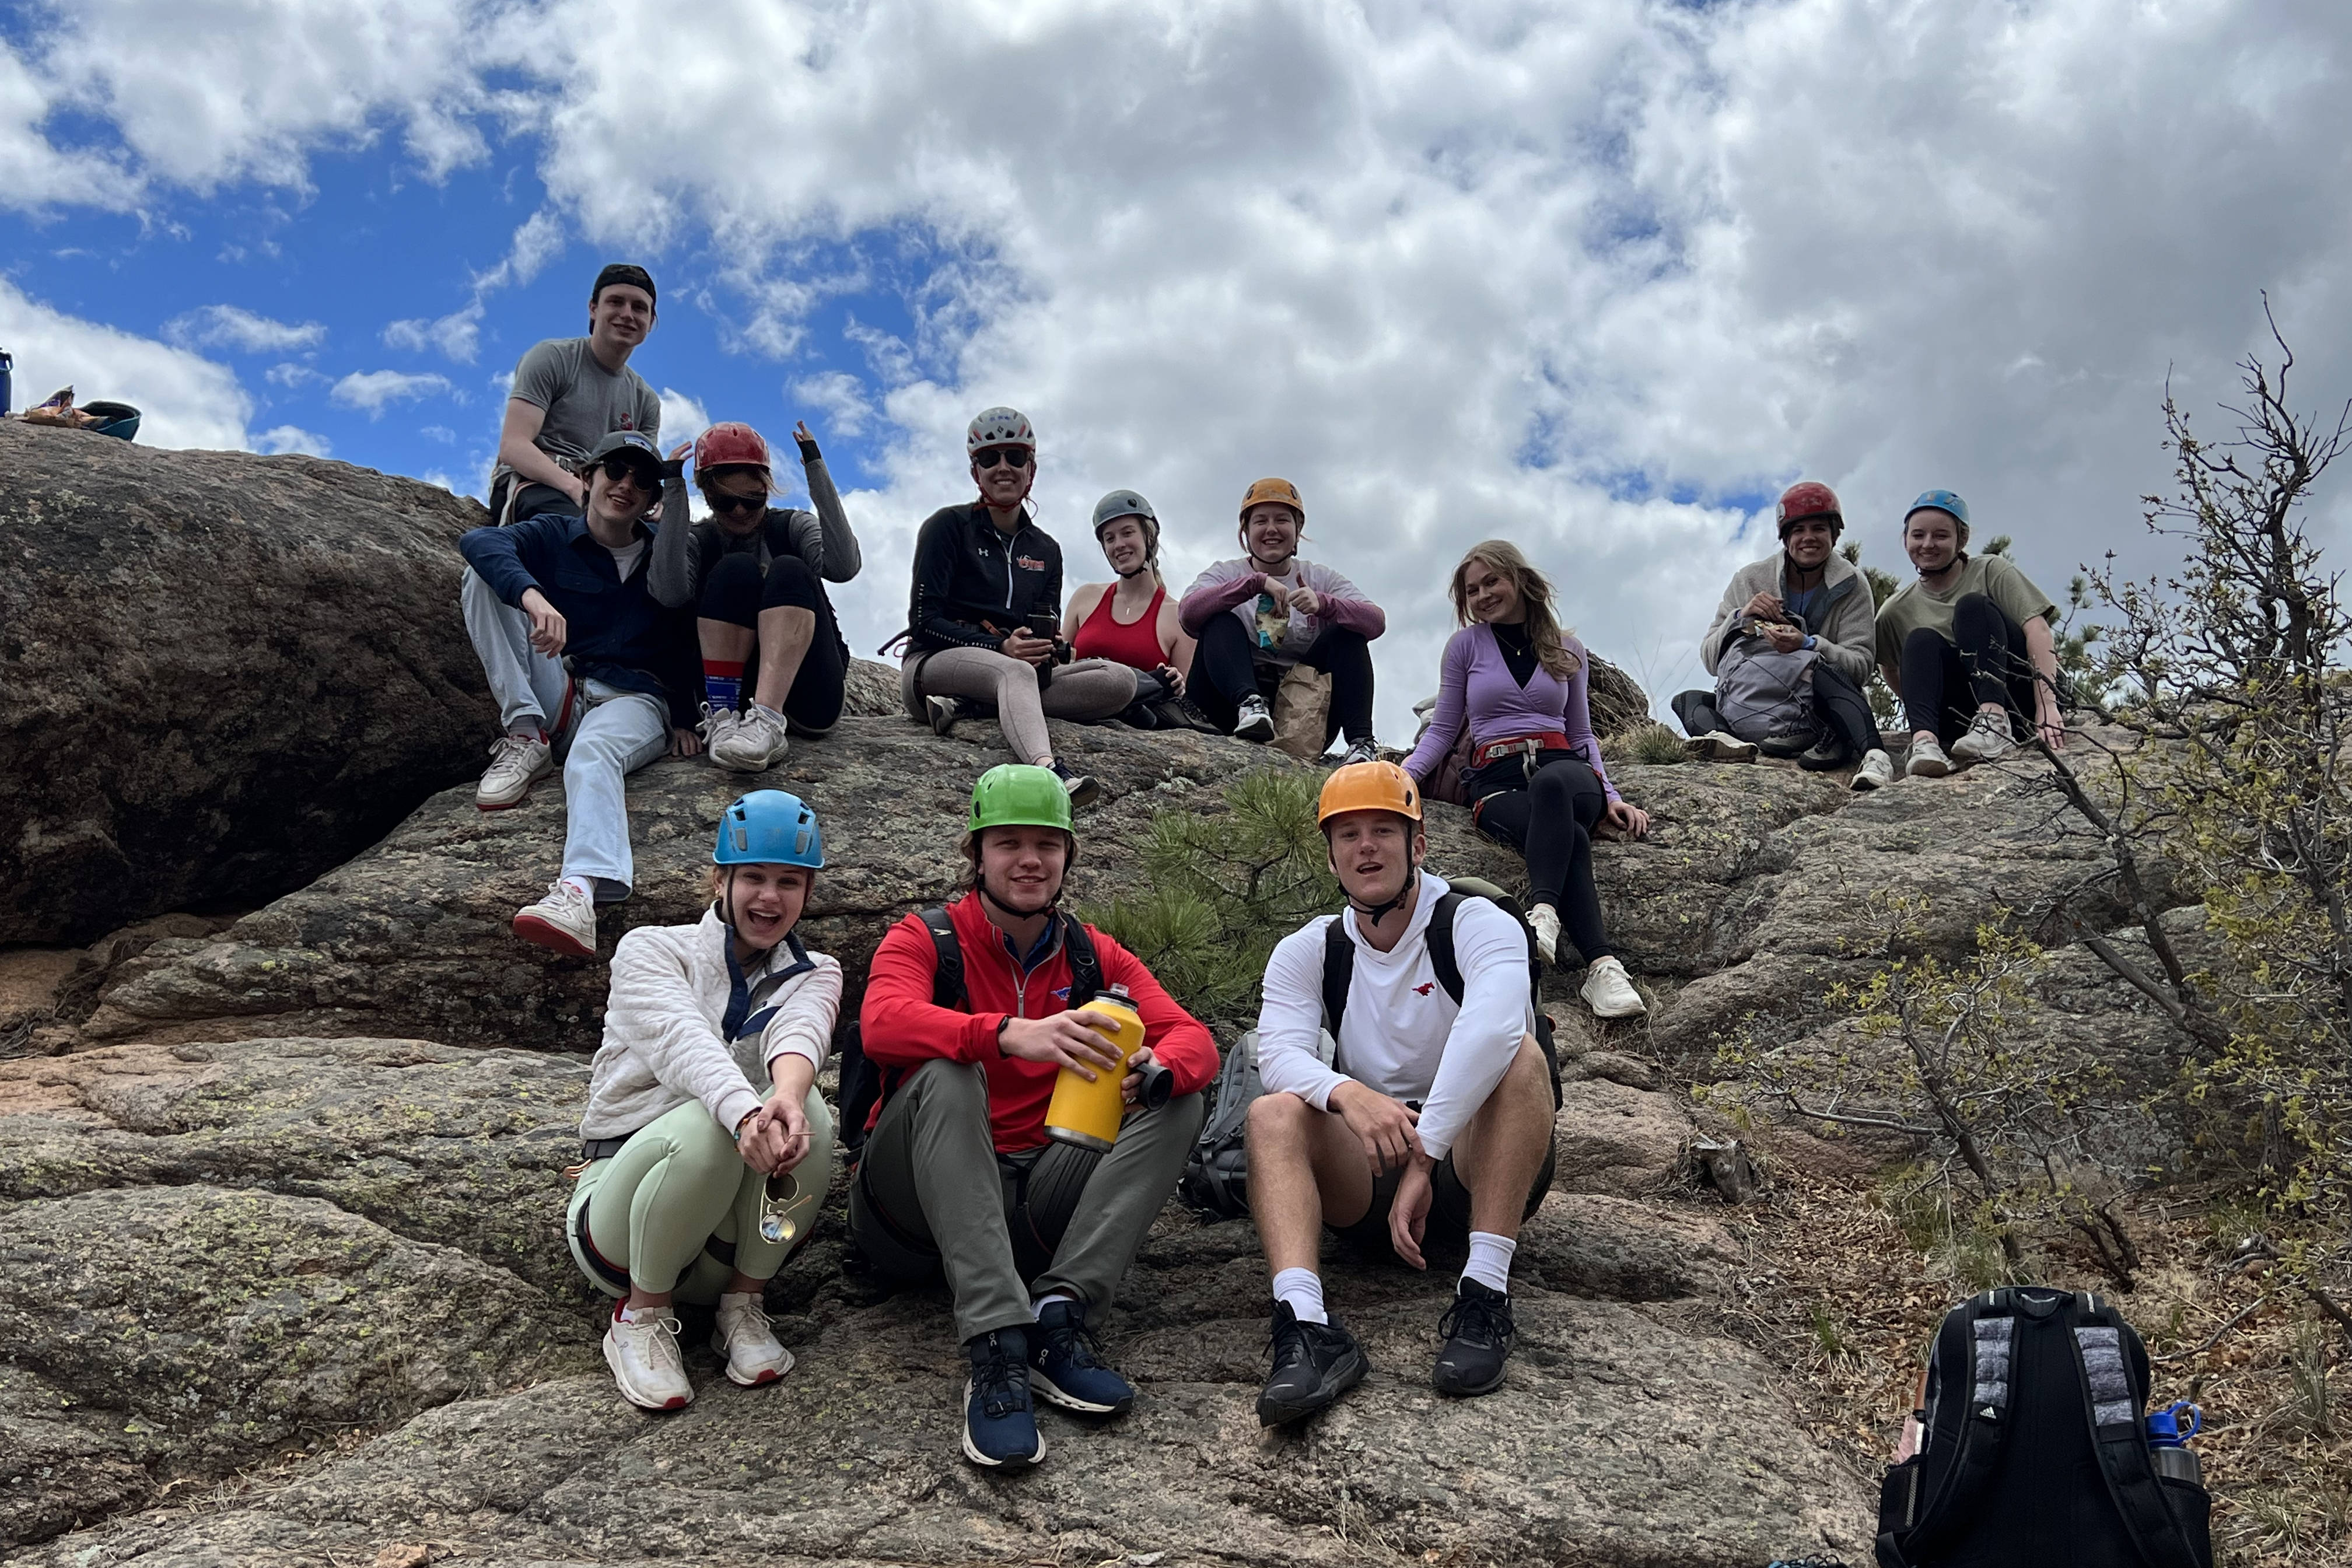 Taos students in rock climbing gear sitting atop a large rock with a blue sky and white clouds in the background.